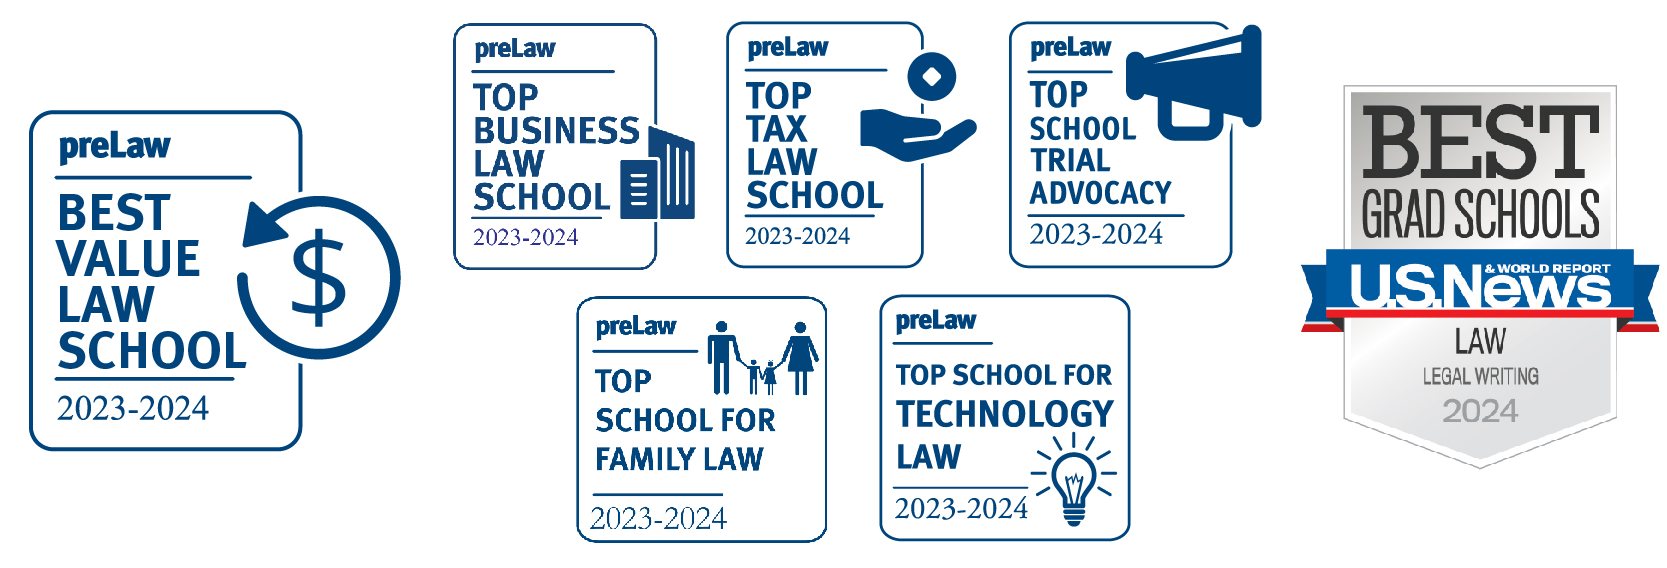 Badges describe the UMKC rankings including Best Value Law School and Top School for Family Law, Technology Law, Business Law, Tax Law and Trial Advocacy and a Best Grad School for Law Legal Writing by 2024 U.S. News and World Report. 